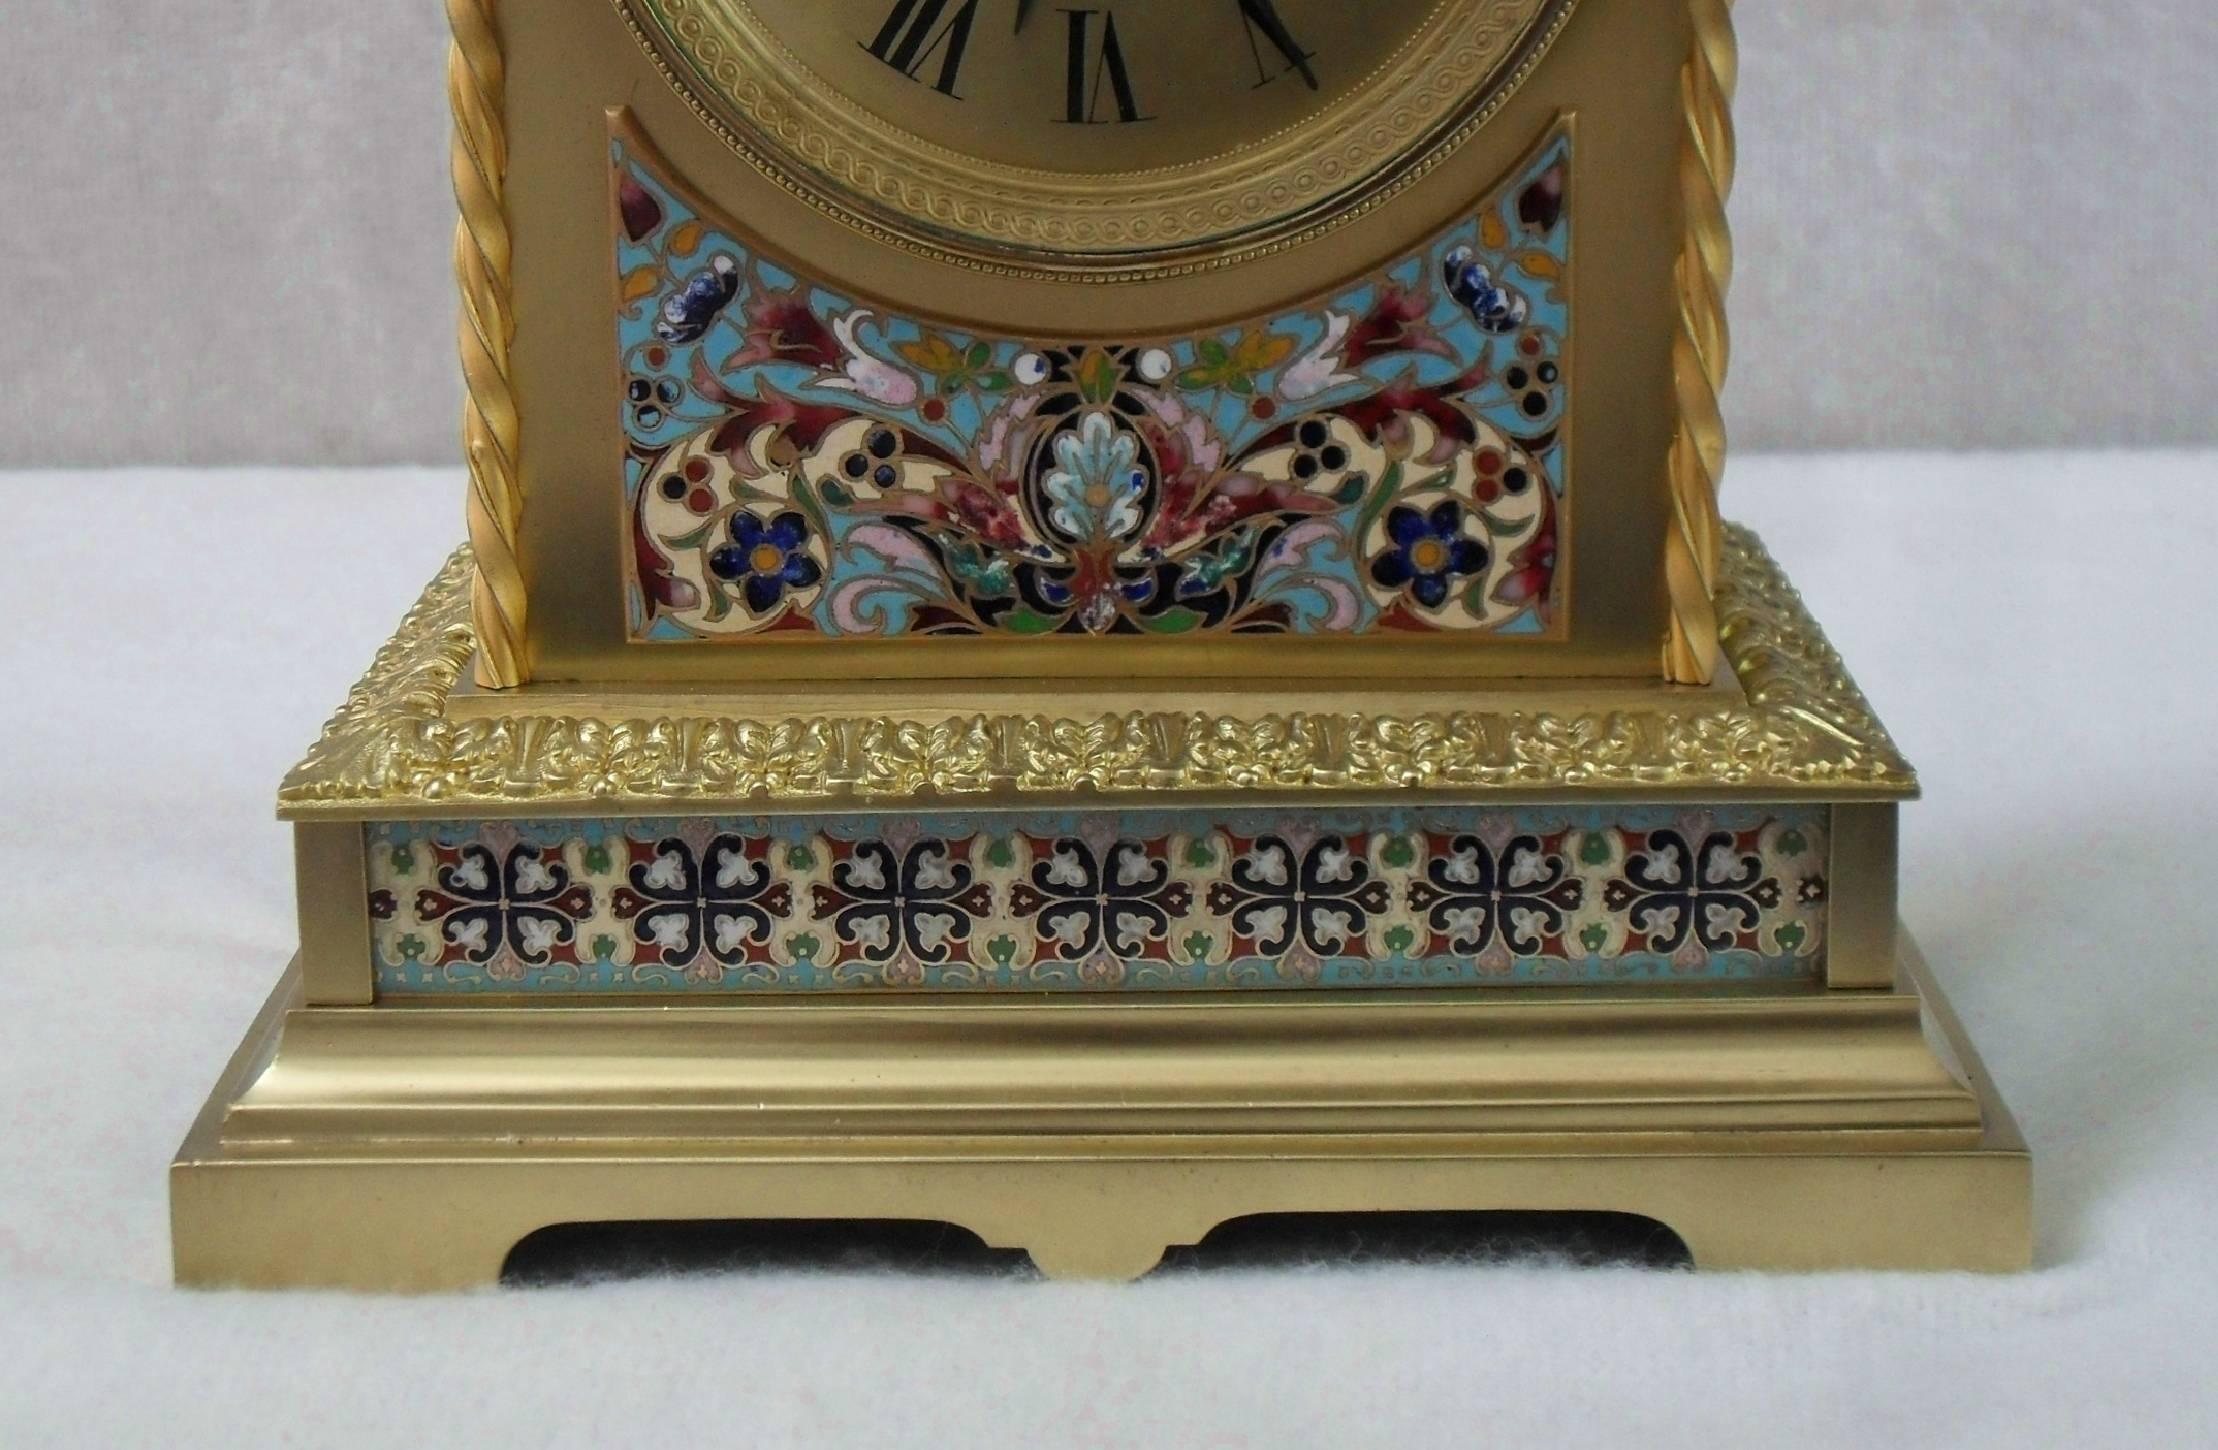 Belle Époque French Belle Epoque Brass and Champleve Mantel Clock